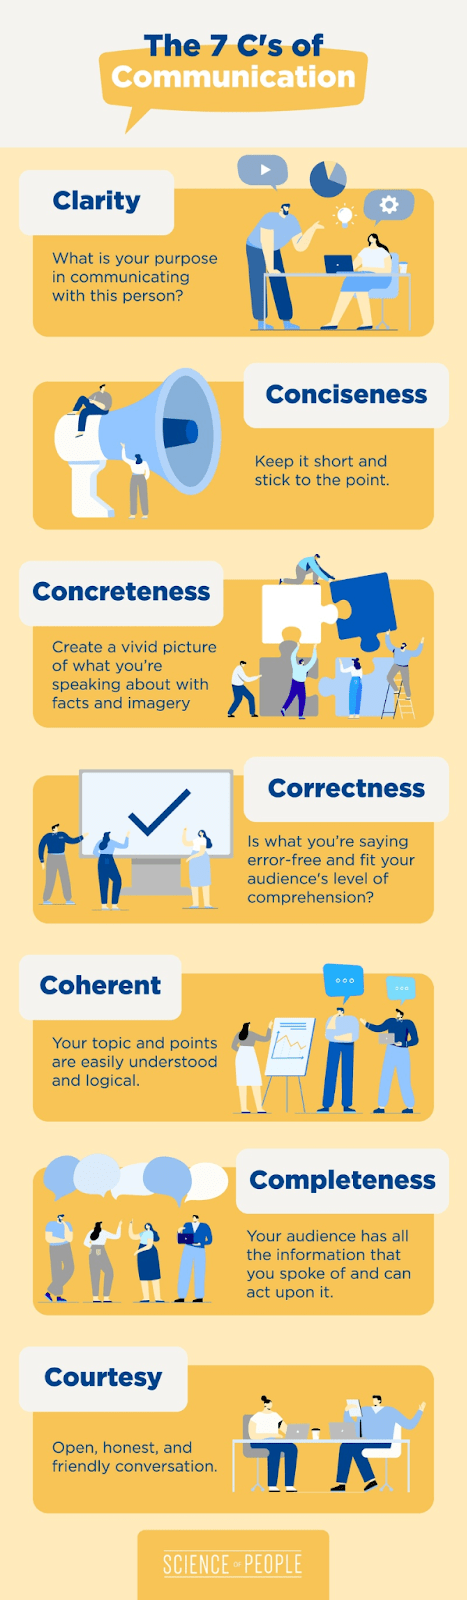 The 7 C's of communication is presented. It includes clarity, conciseness, concreteness, correctness, coherent, completeness, and courtesy.